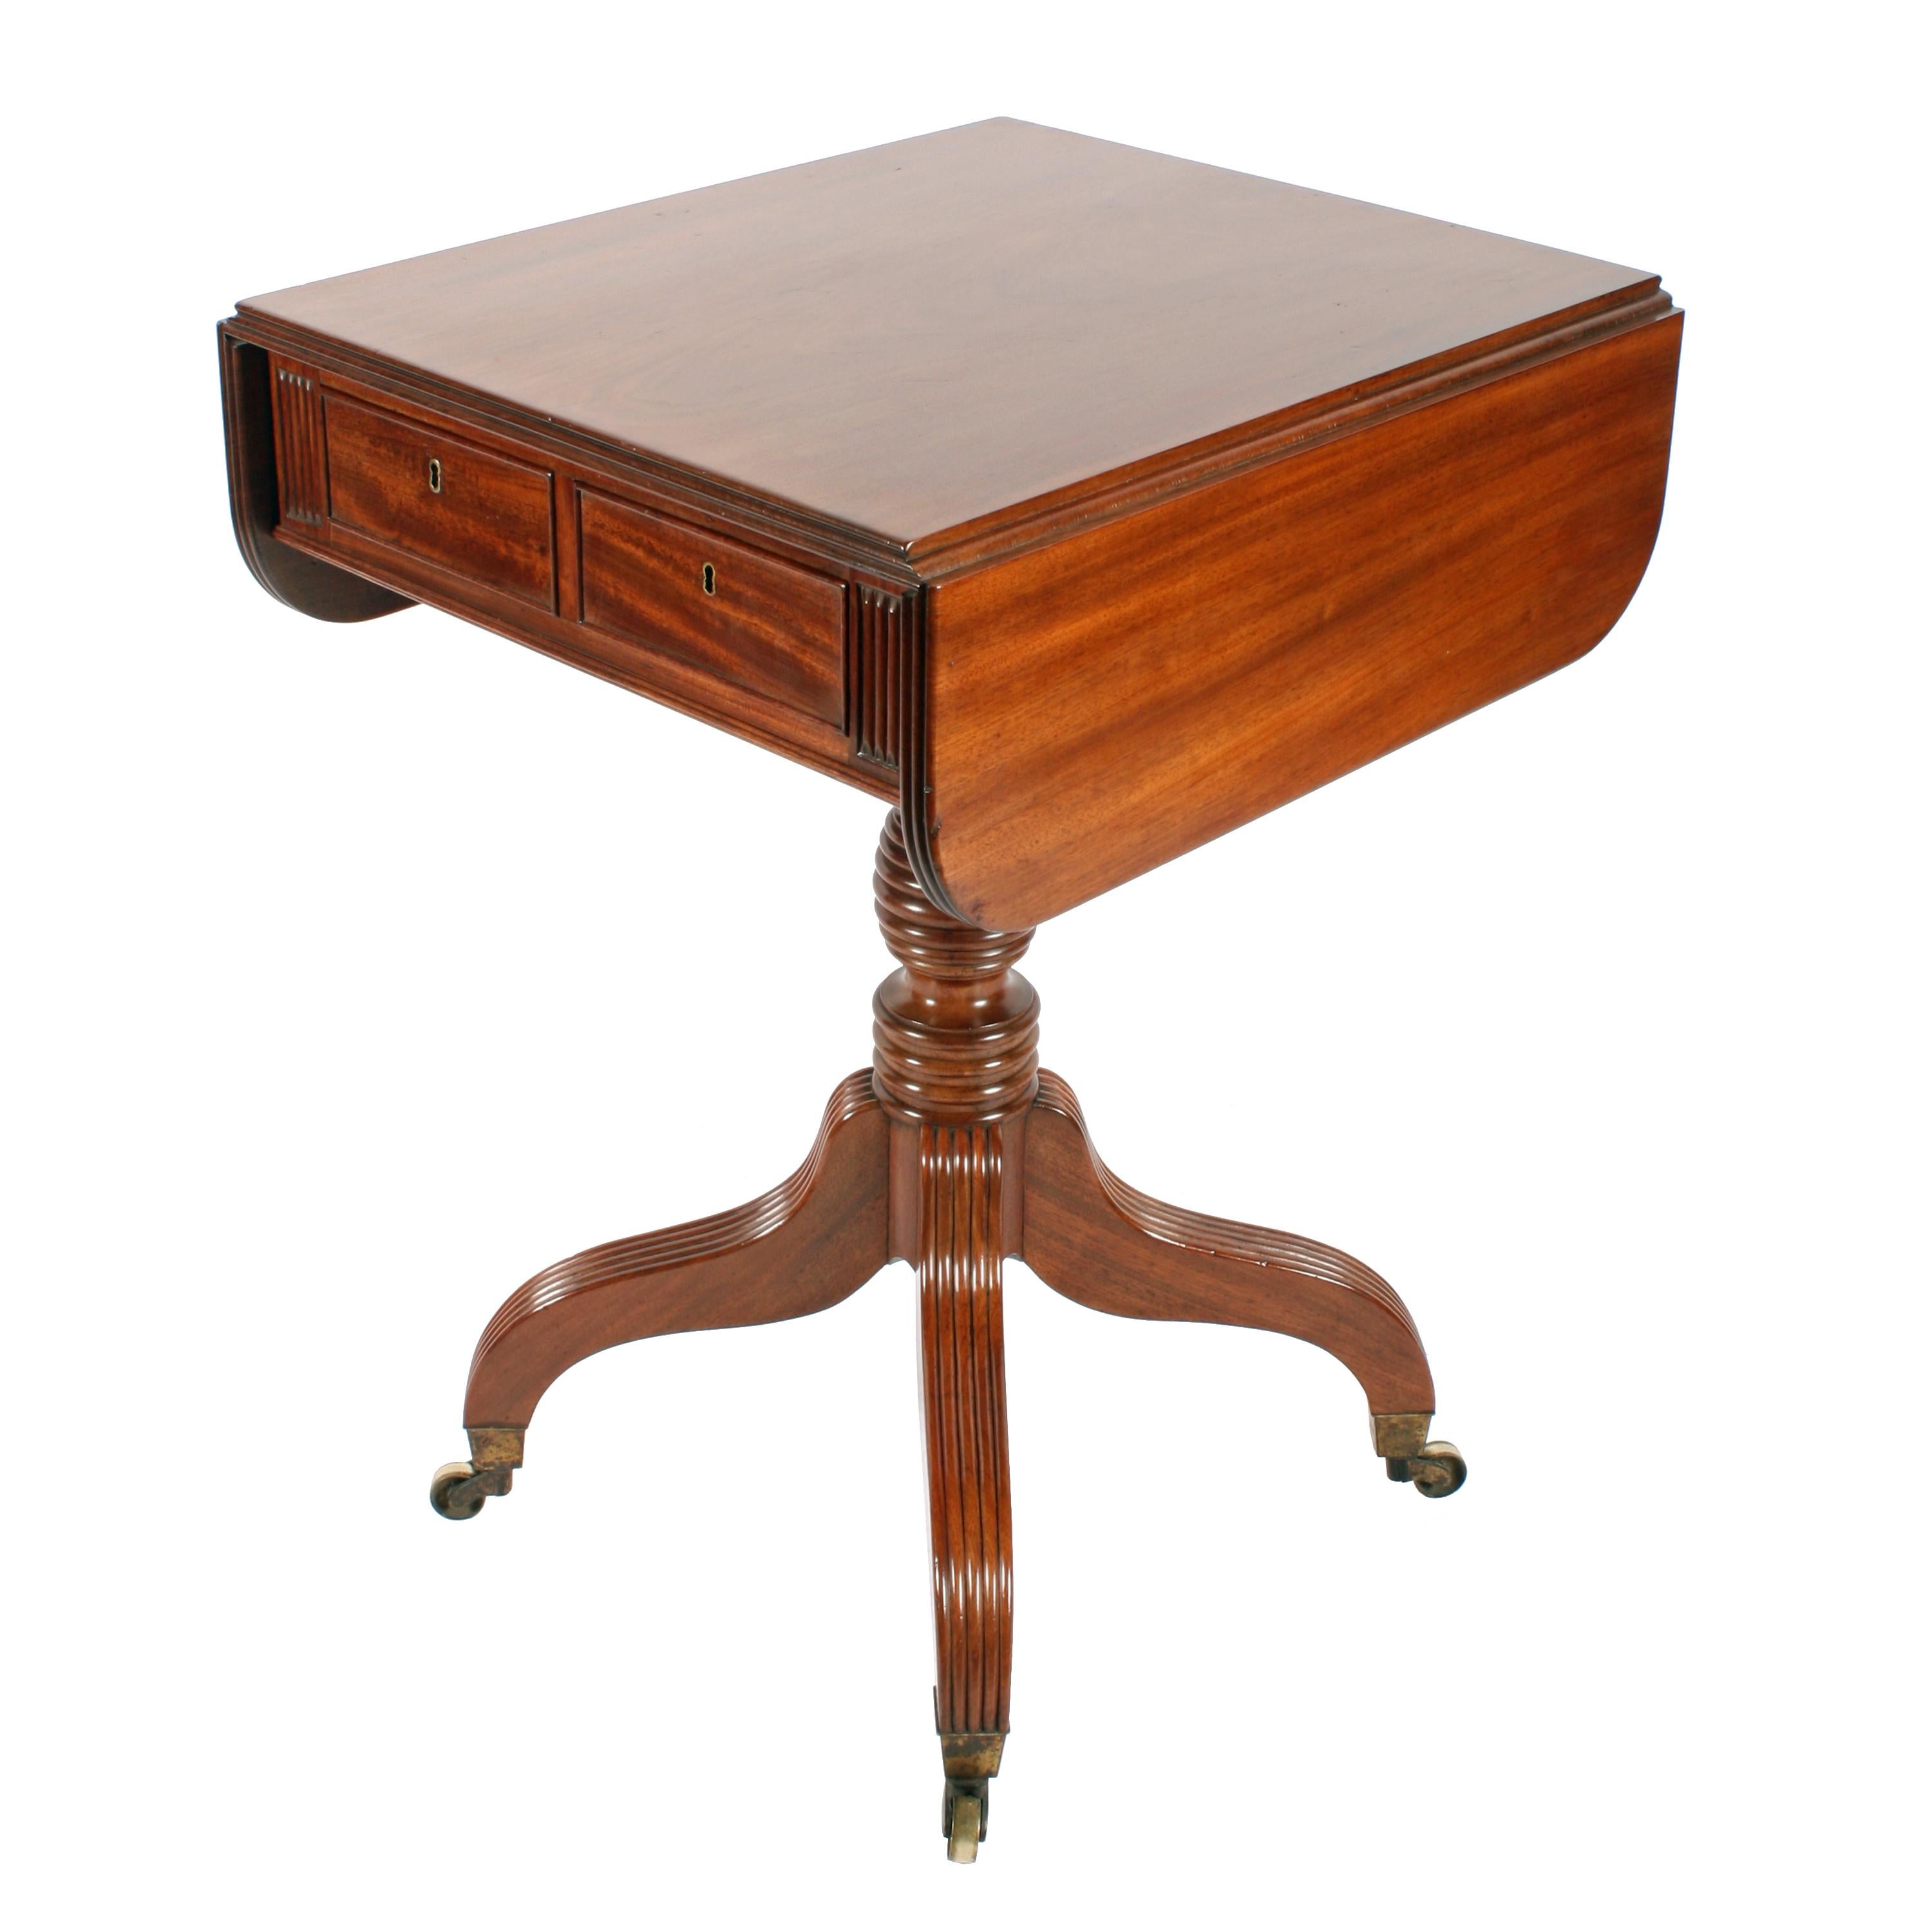 An early 19th century Georgian mahogany drop-leaf table.

The table is made of solid mahogany throughout and is the style and quality of Gillows.

The drop leaf top has a reeded edge, the leaves are supported by a single hinged flap on each